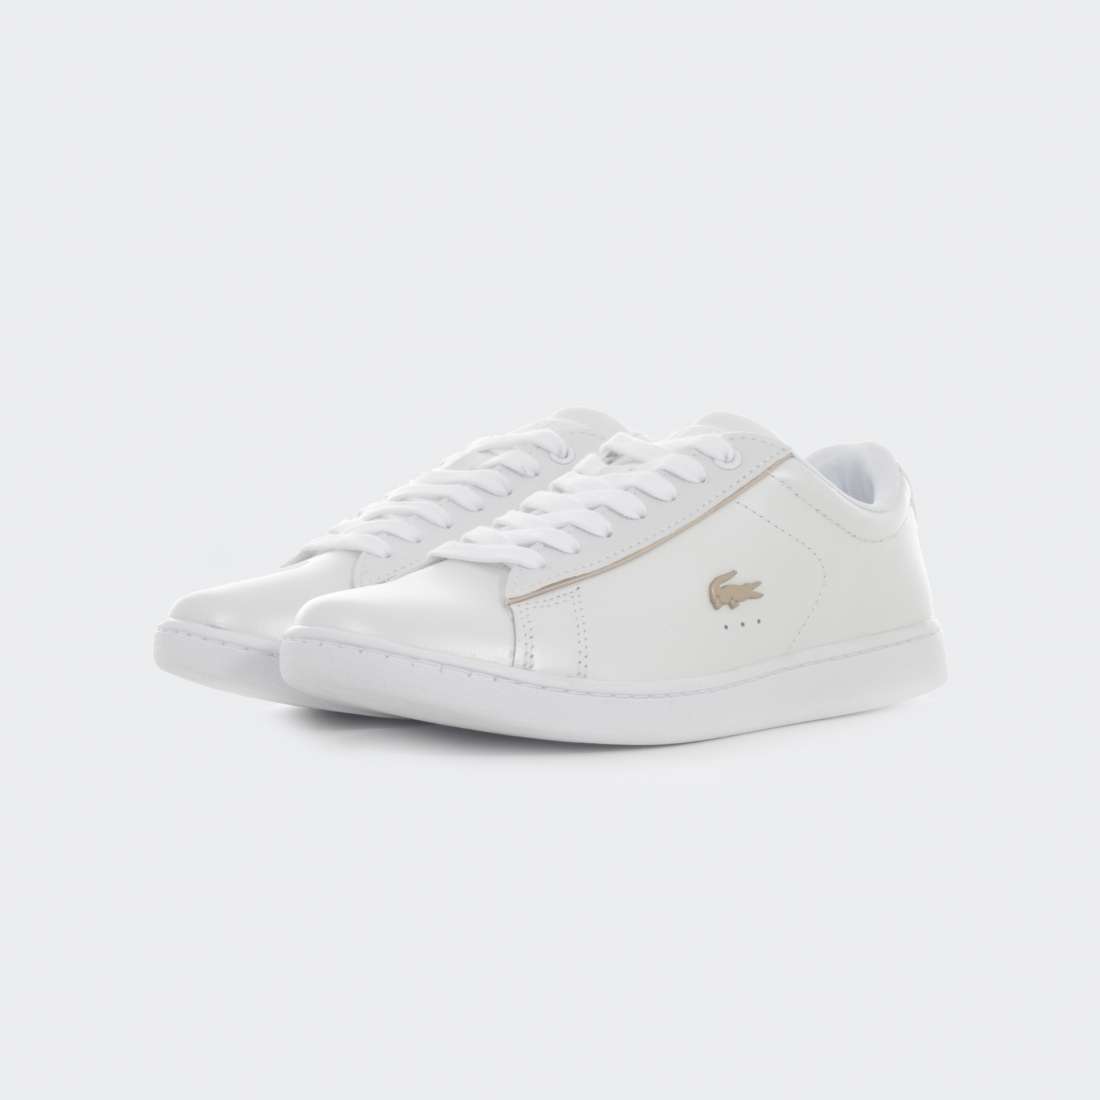 LACOSTE CARNABY EVO SATIN WHITE/GOLD